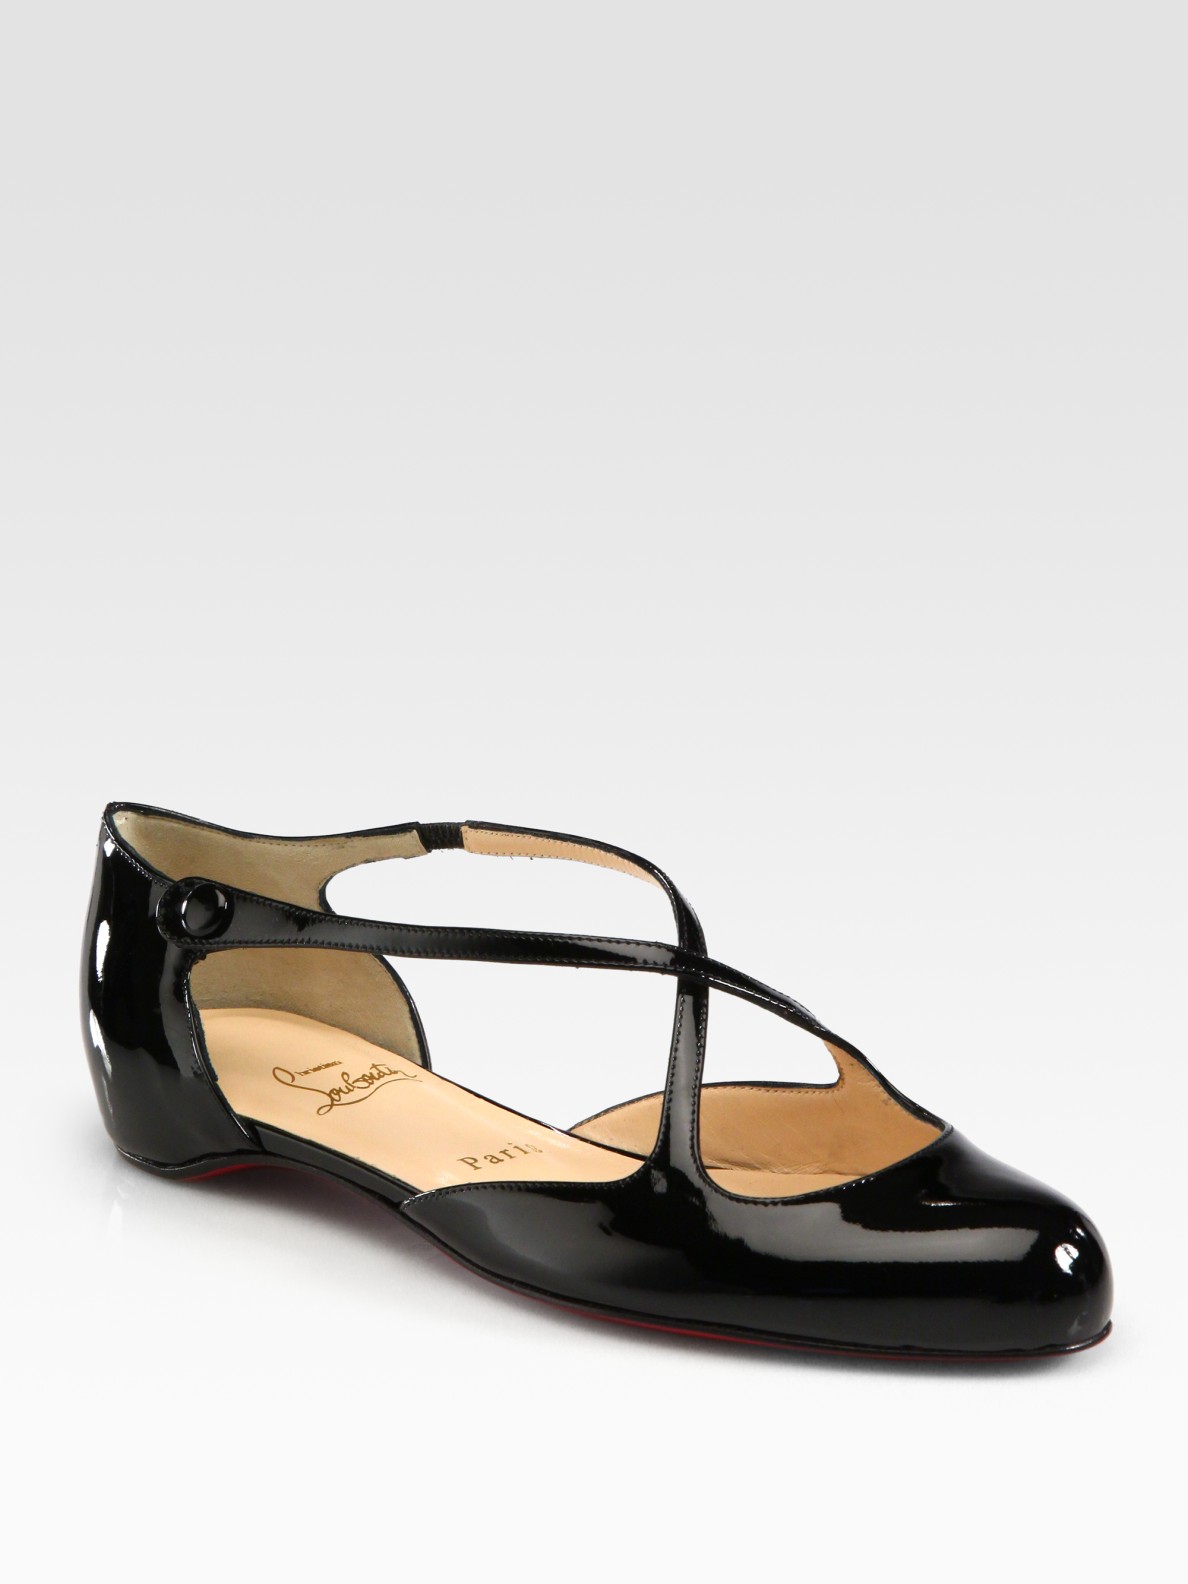 Christian Louboutin Pneumatica Patent Leather Mary Flats in Black | Lyst